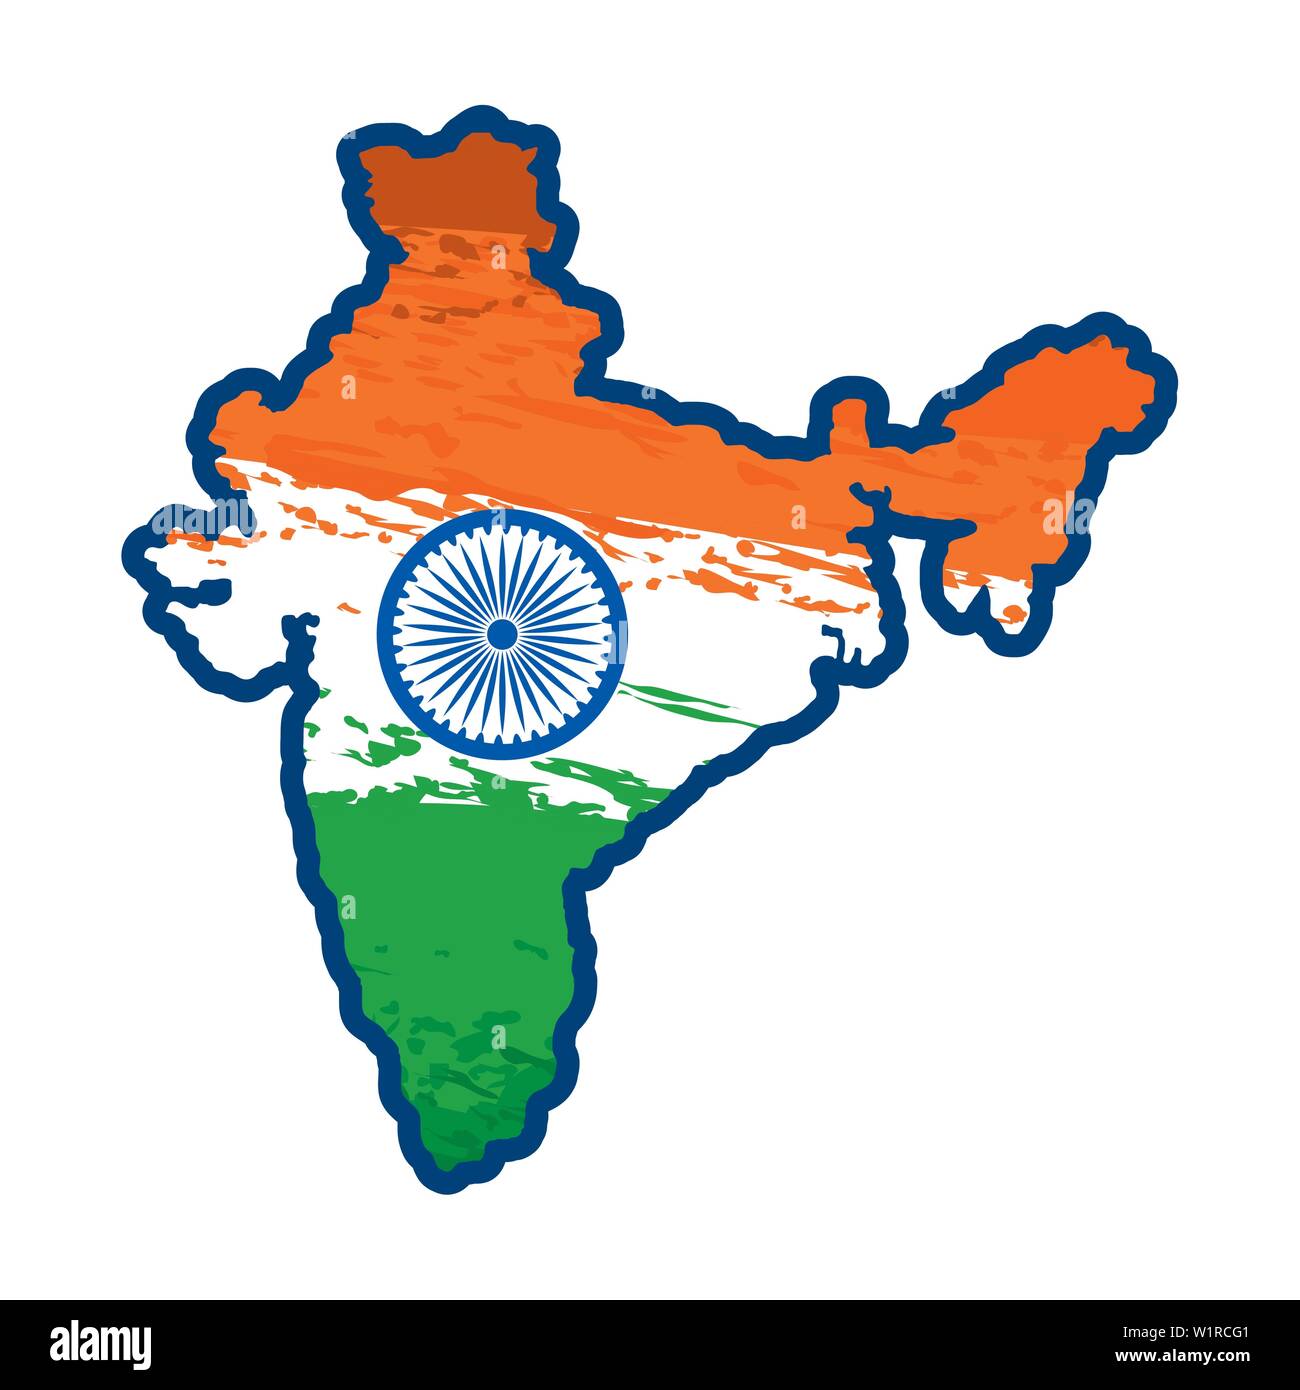 India flag map Royalty Free Vector Image - VectorStock